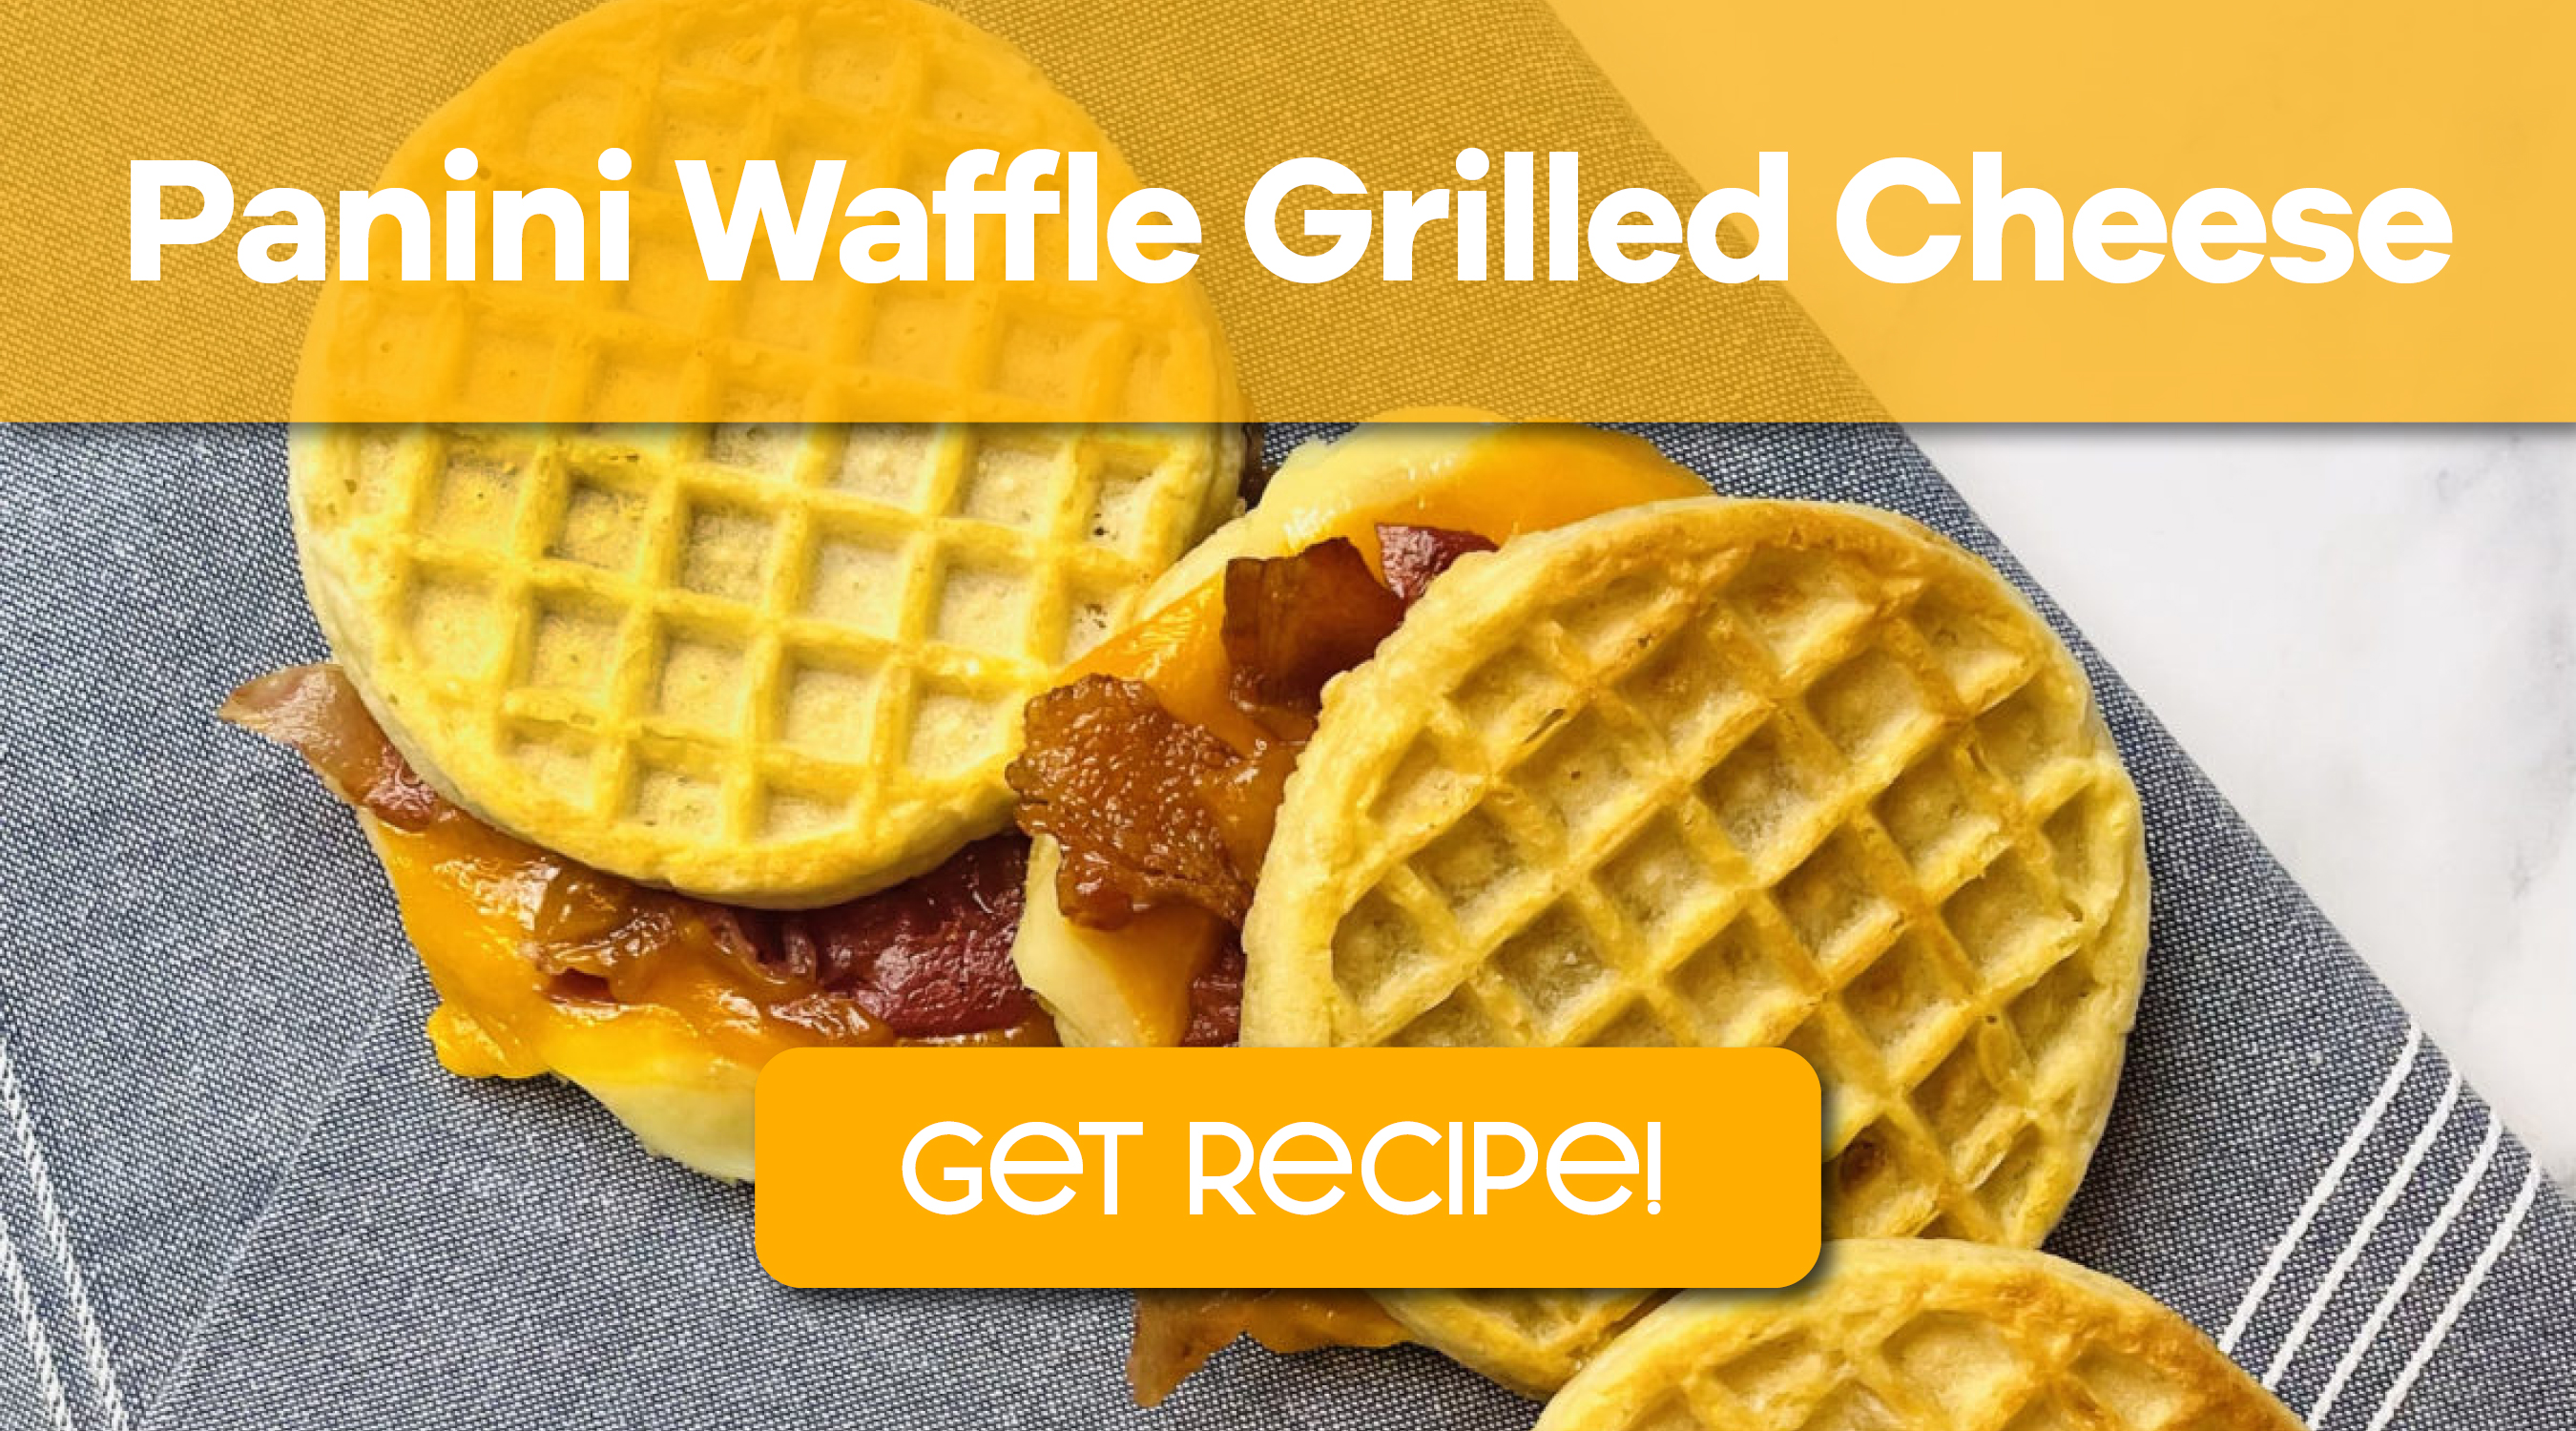 Panini Waffle Grilled Cheese